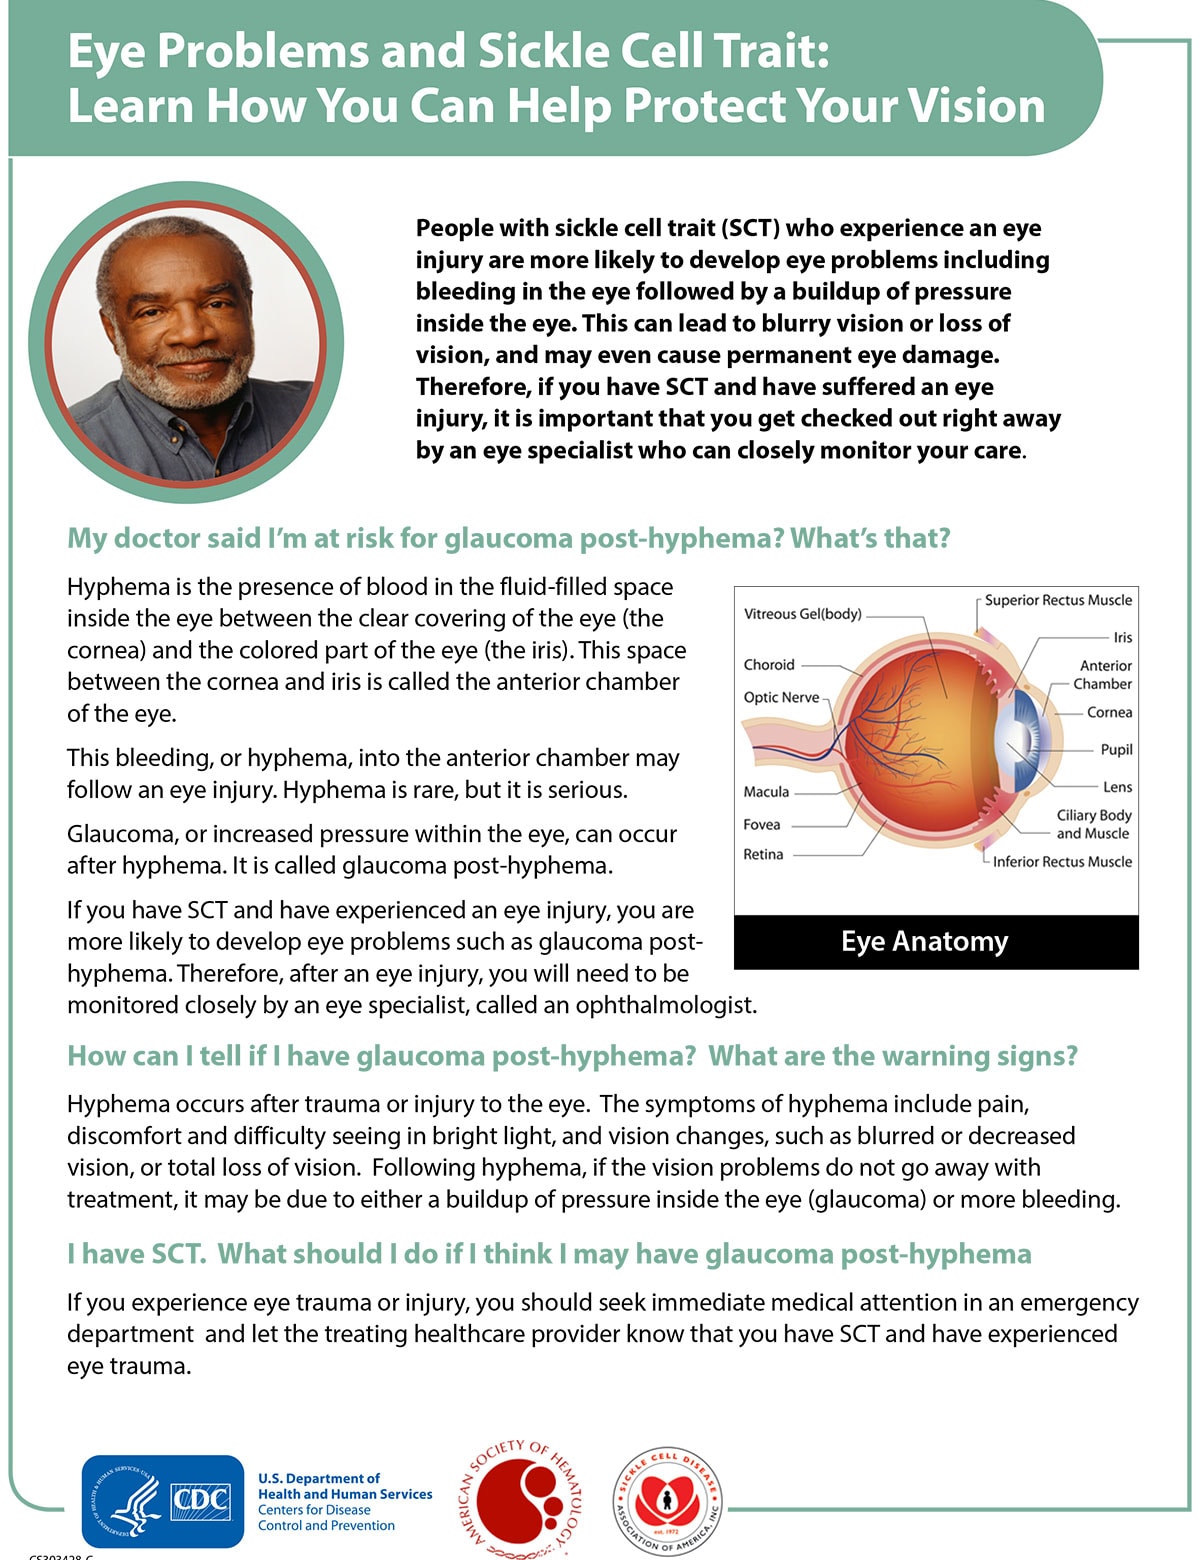 Eye Problems and Sickle Cell Trait: Learn How You Can Help Protect Your Vision Fact Sheet Thumbnail